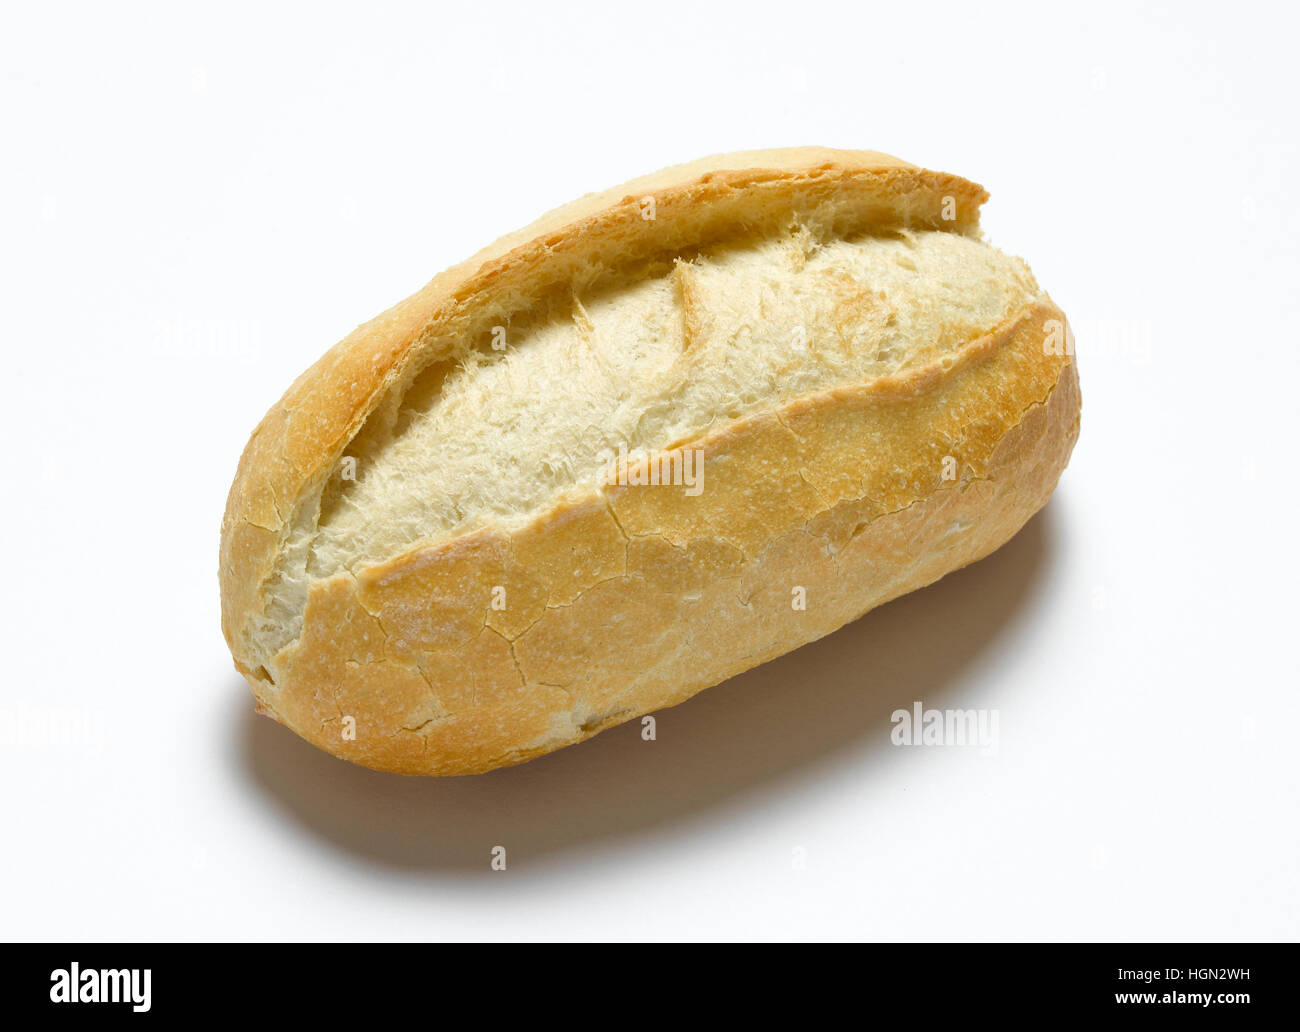 Bread Roll isolated on a white background Stock Photo